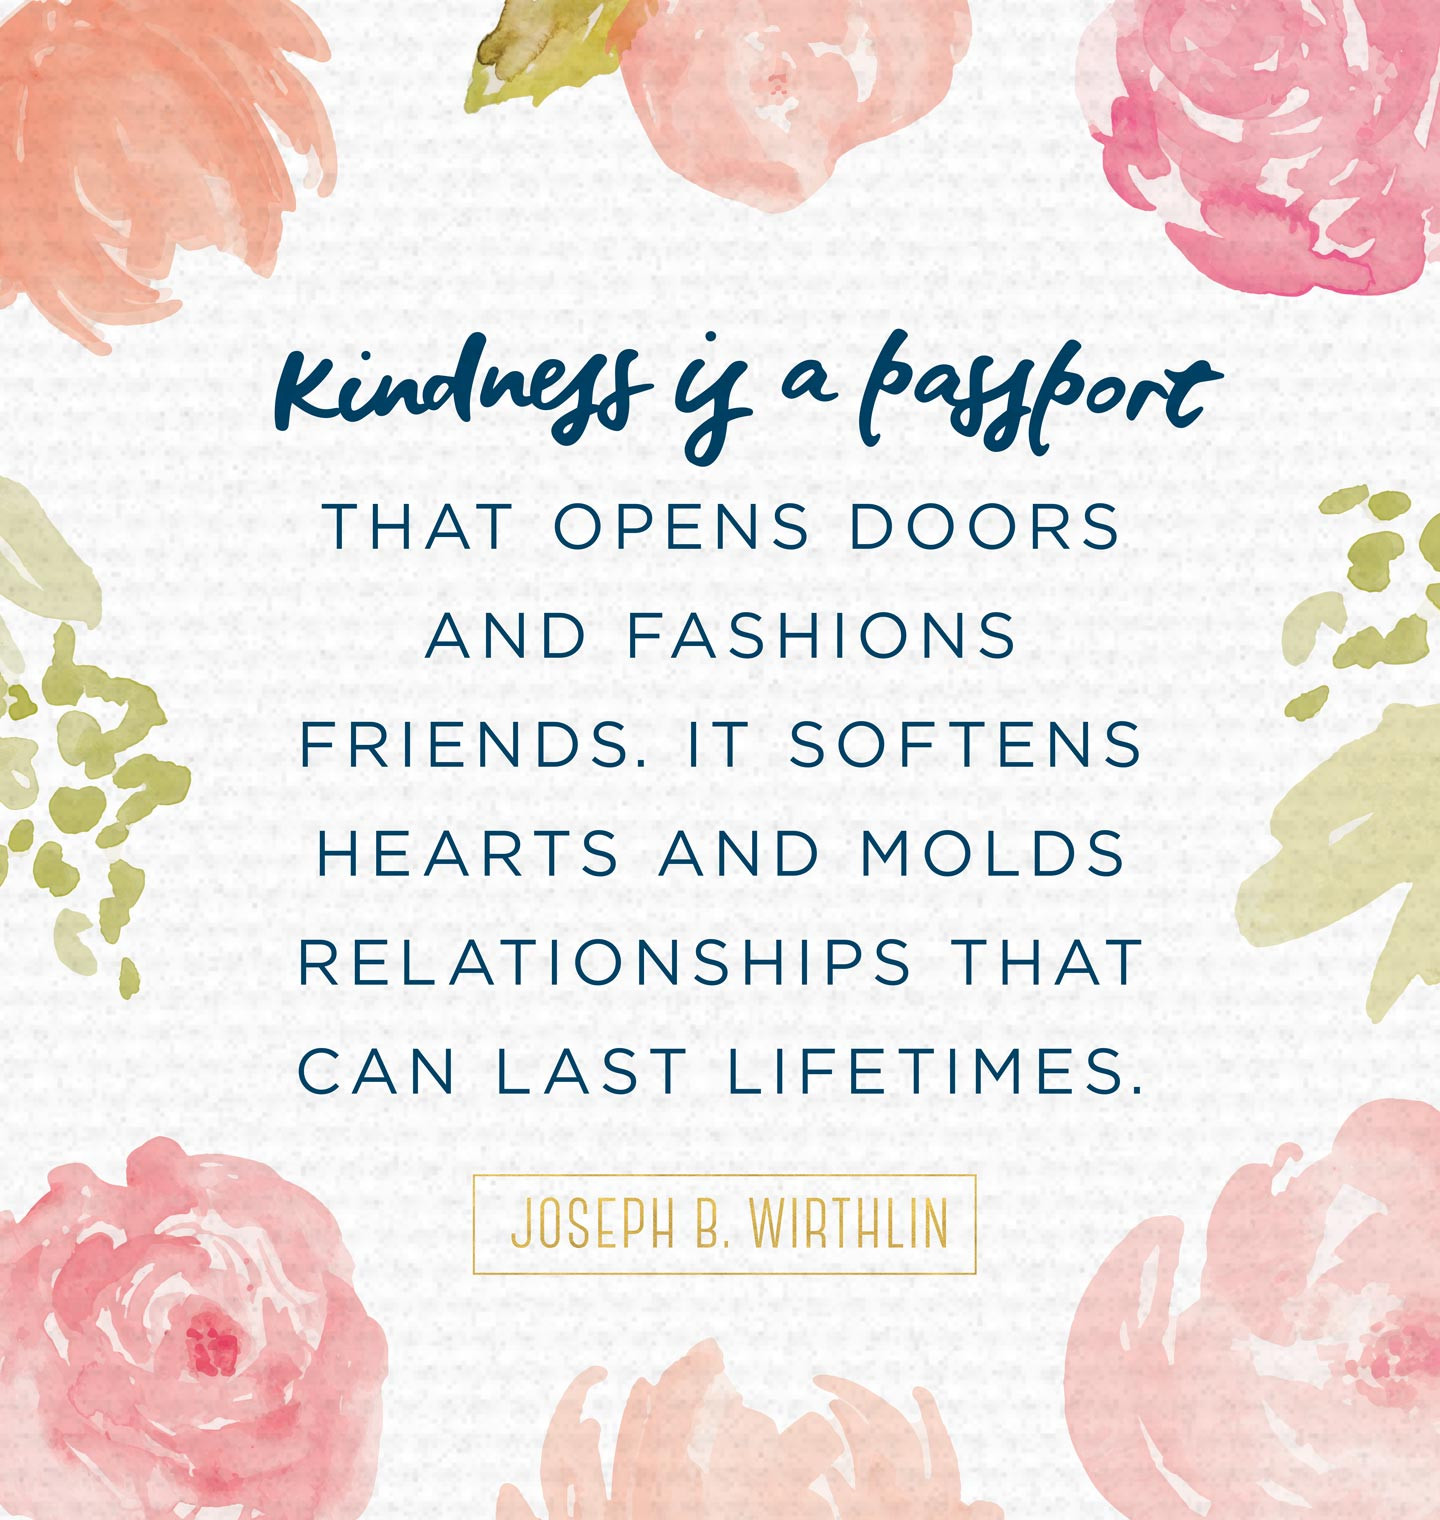 Quotes For Kindness
 30 Inspiring Kindness Quotes That Will Enlighten You FTD